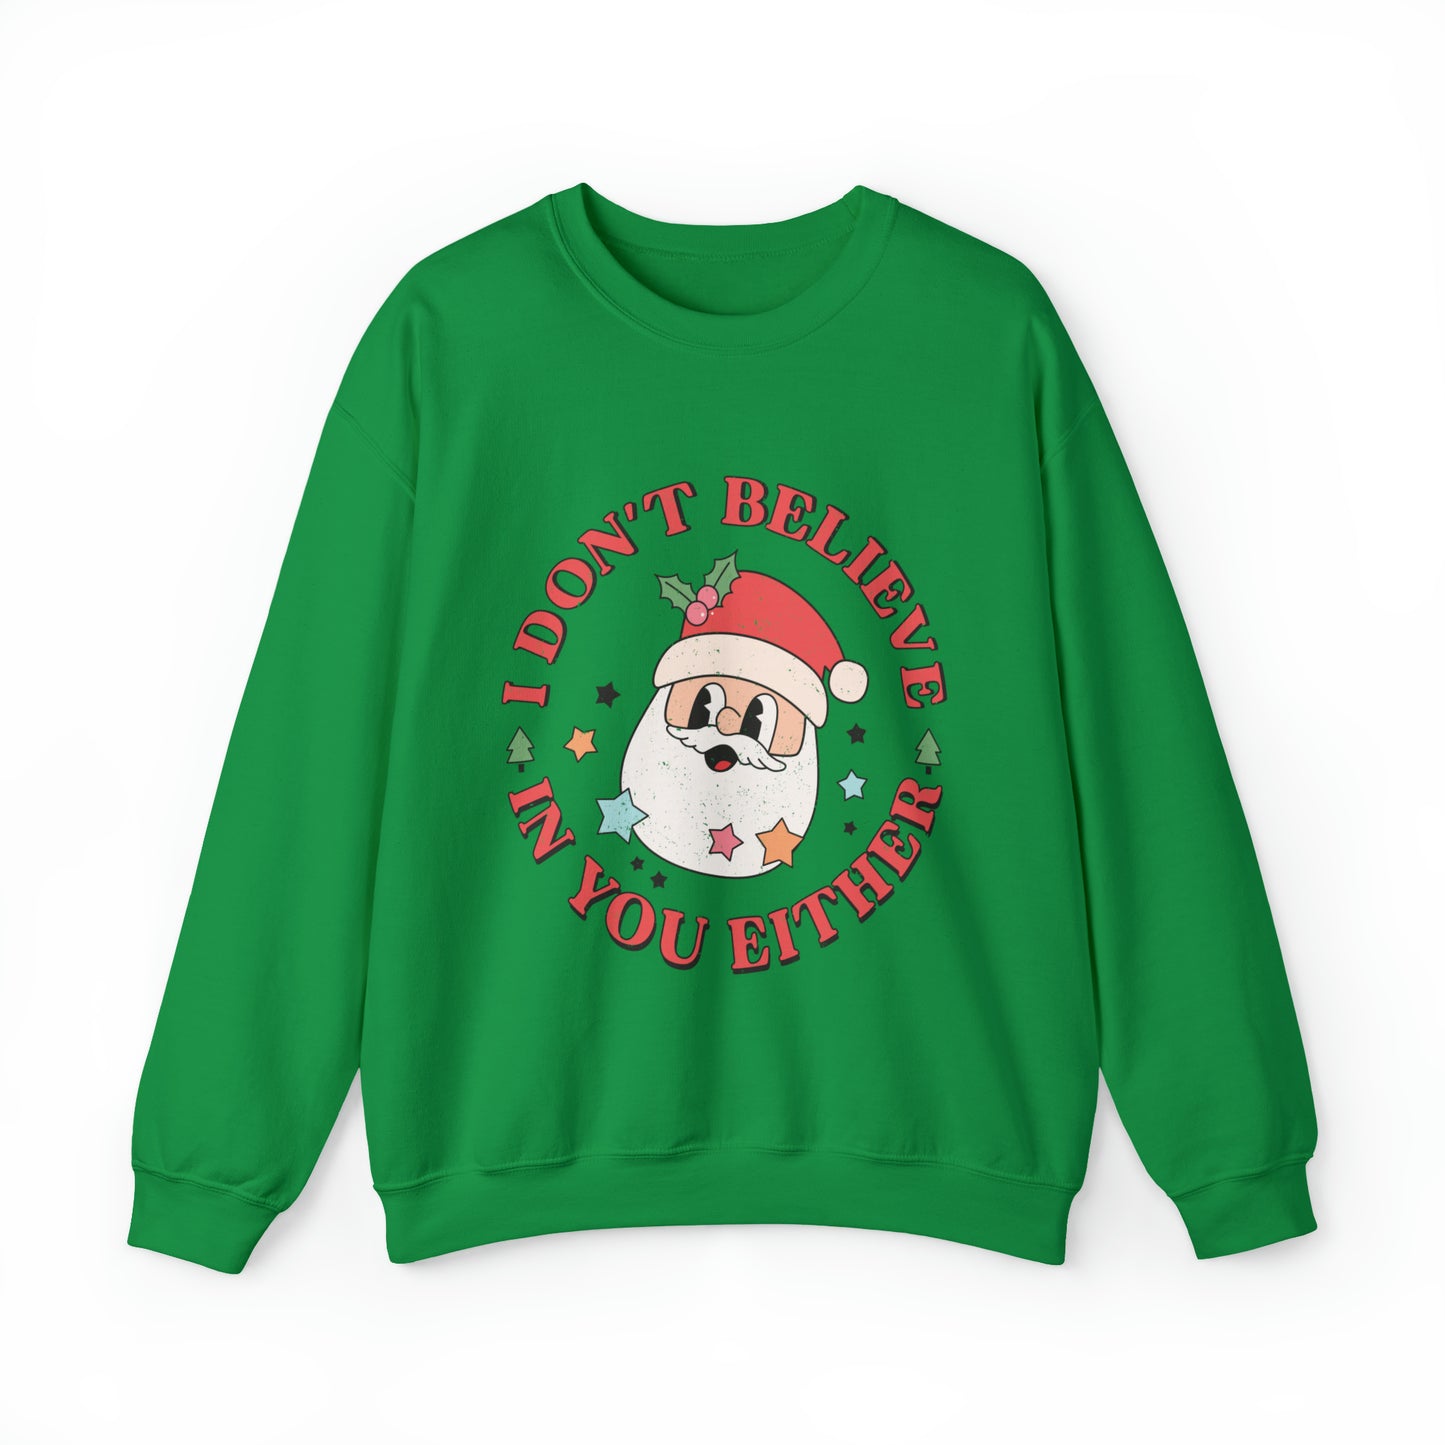 I don't believe in you either Women's funny Santa Christmas Crewneck Sweatshirt